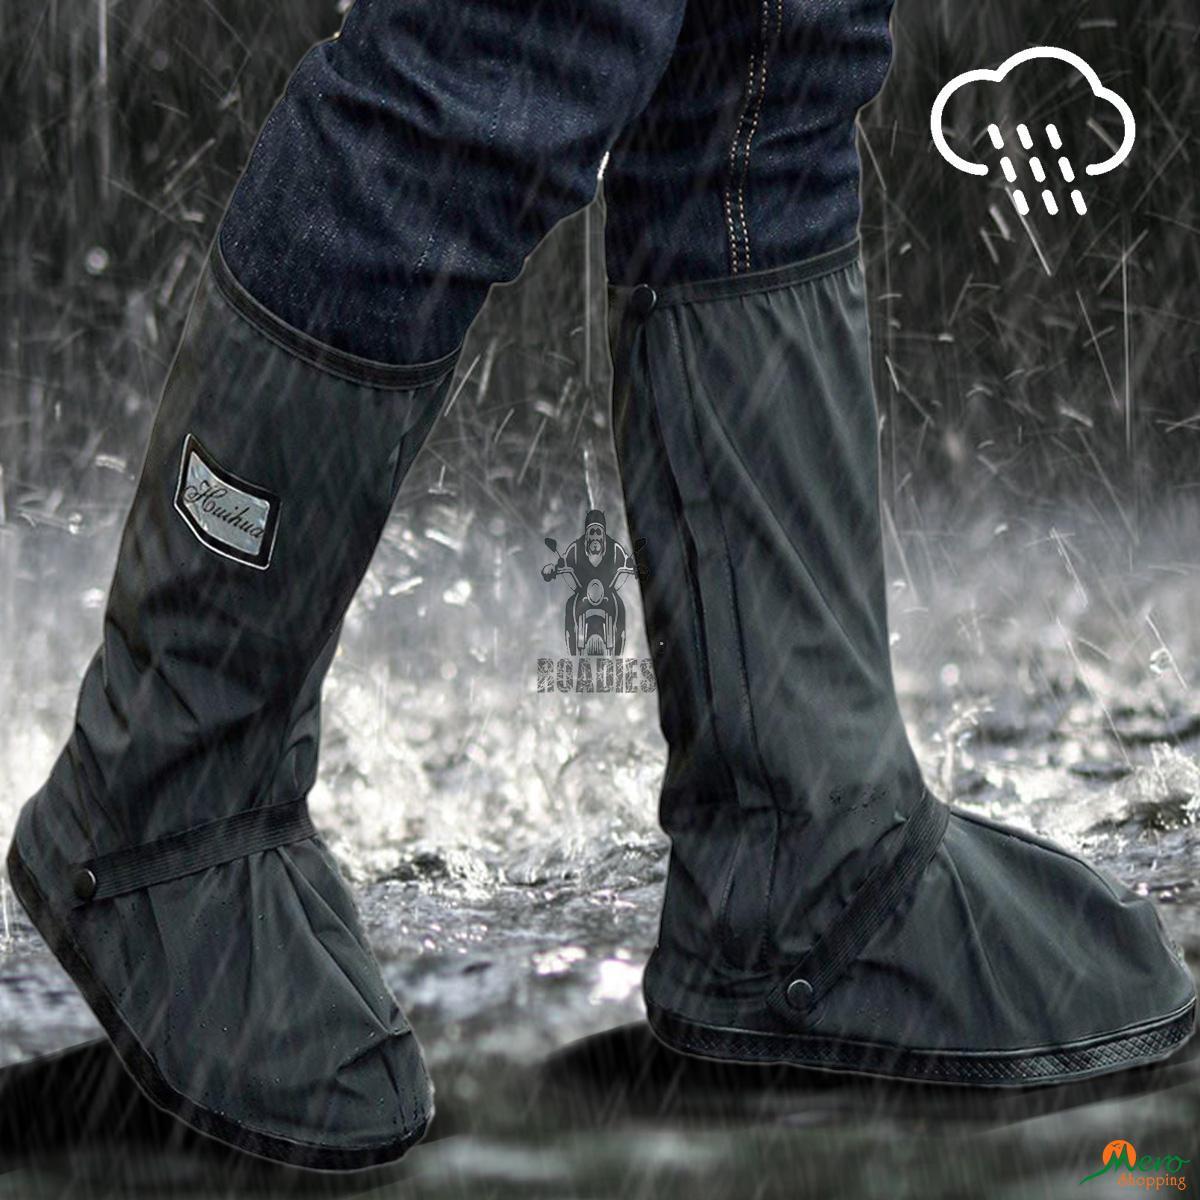 XL-Black Waterproof Snow Rain Boot Shoe Cover Protector Reusable Cycling Shoe Protective Gear with reflecto 